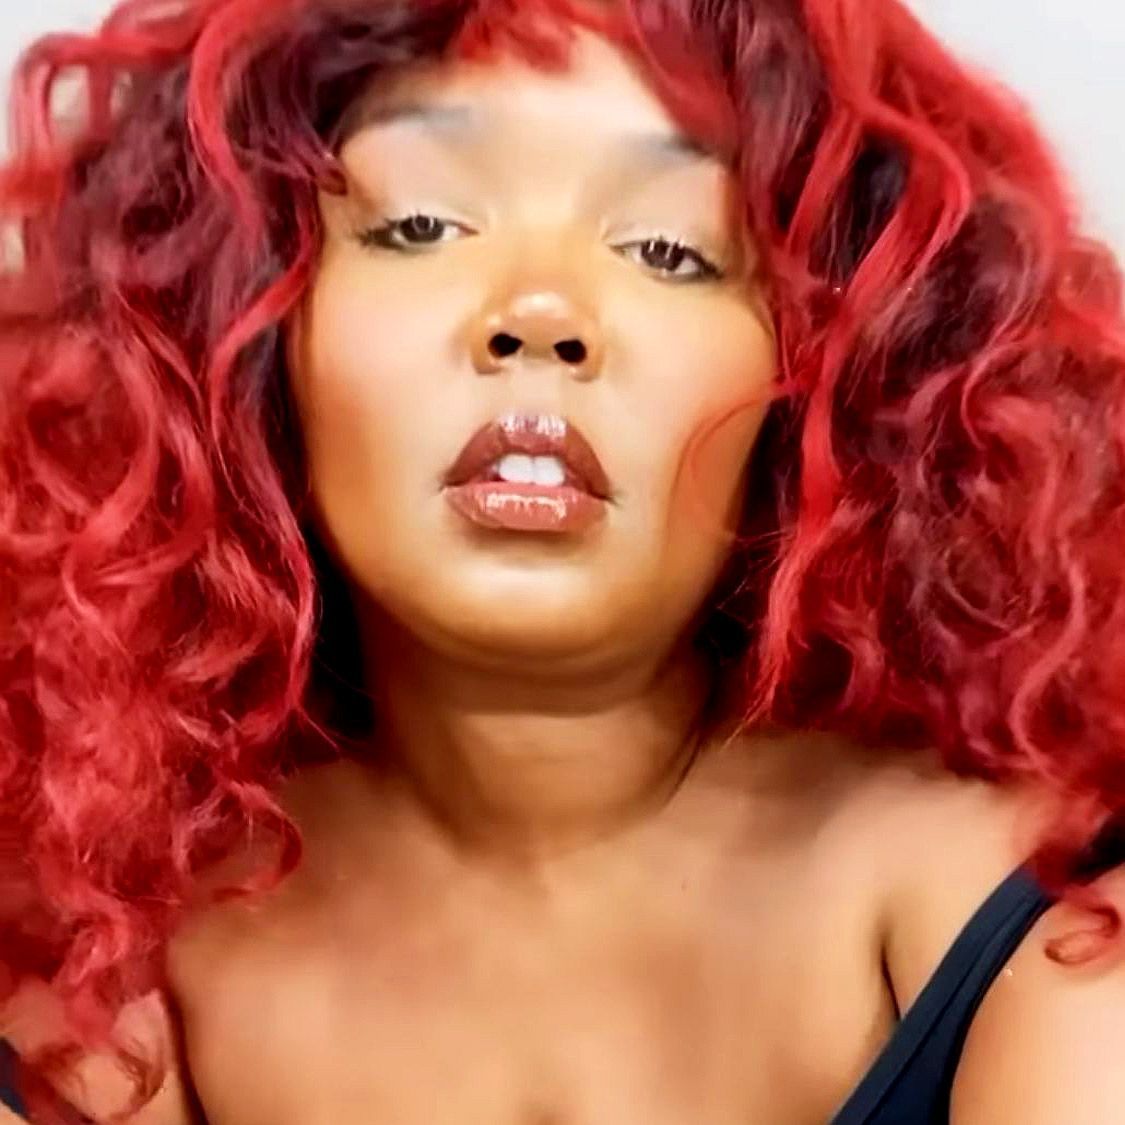 Lizzo Switched Up Her Look With Bright Red Hair and Bangs.